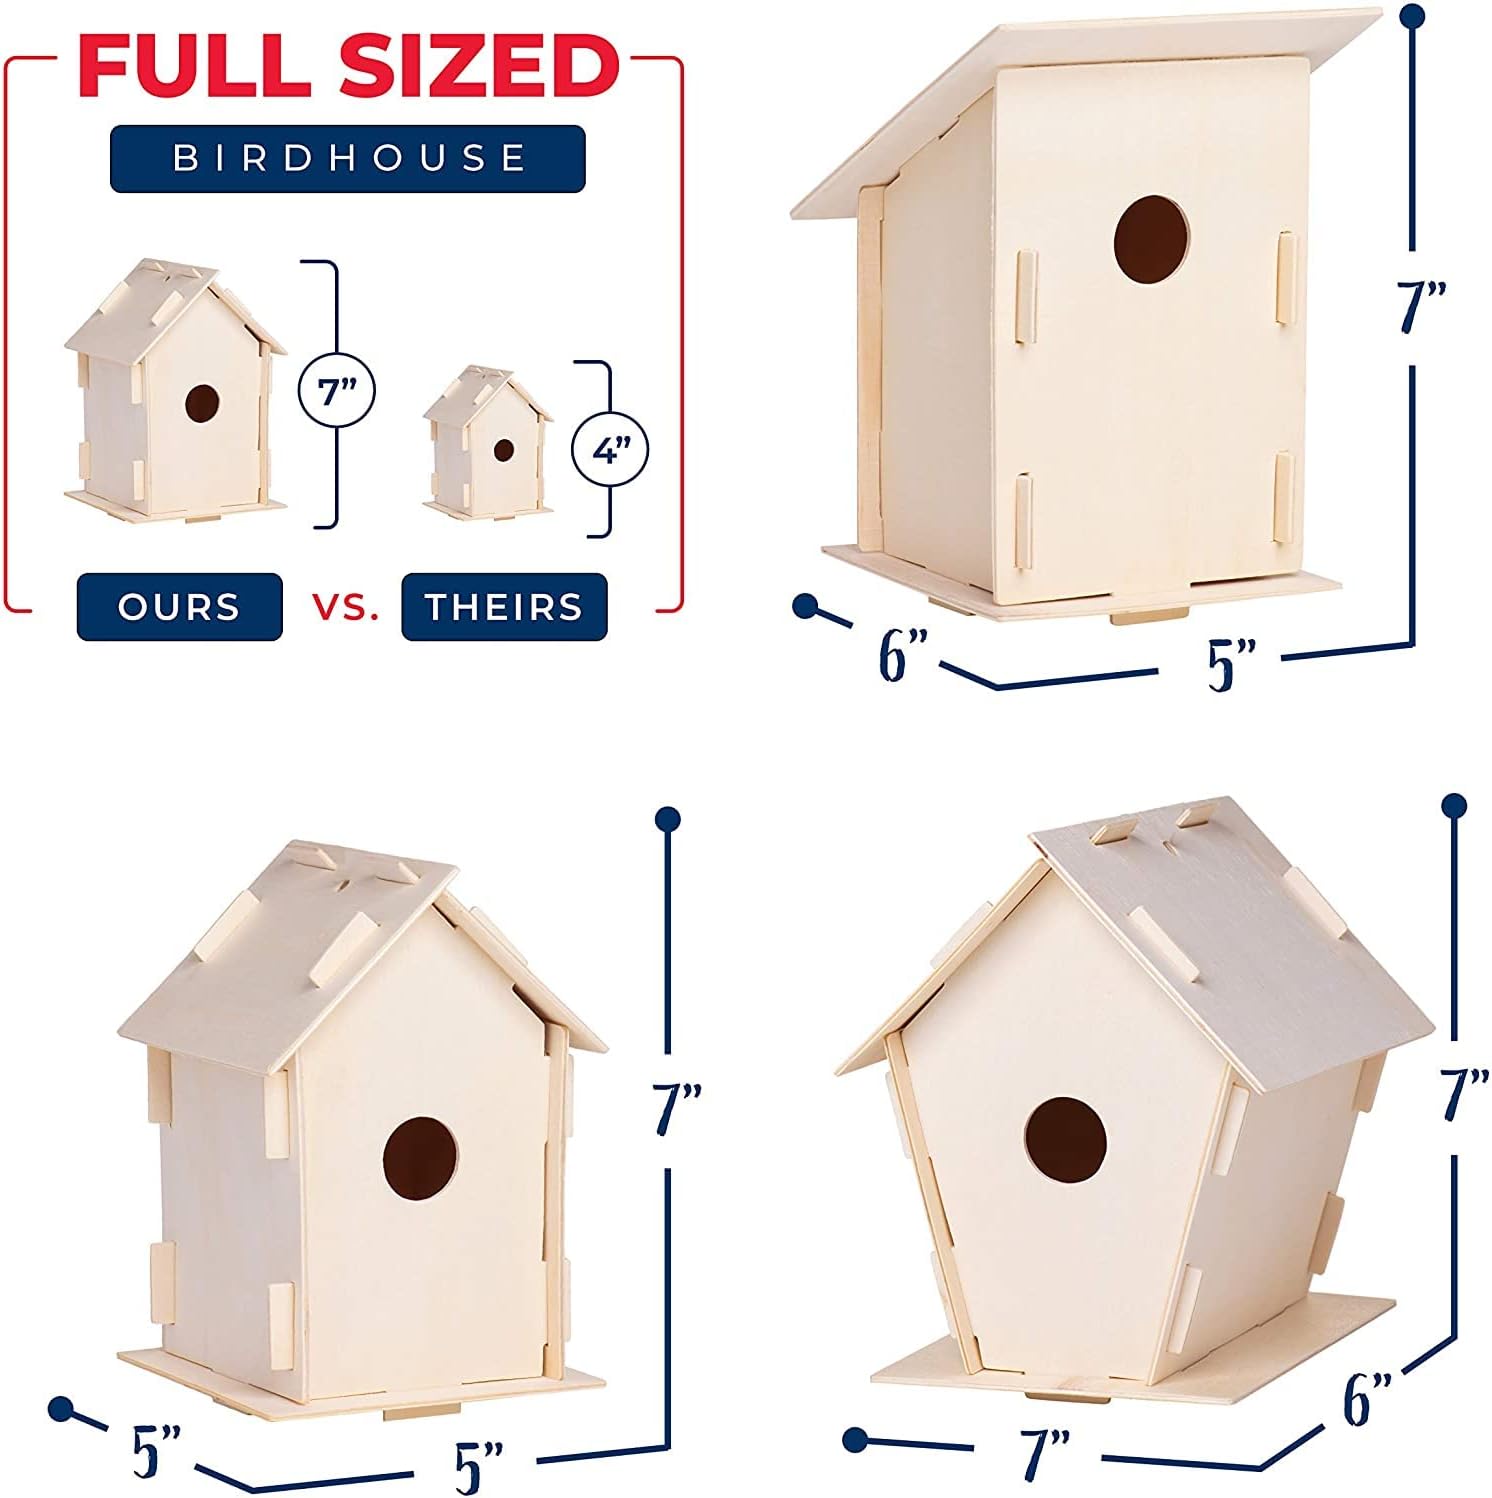 Neliblu 12 DIY Wooden Birdhouses - A Fun and Educational Craft Set for Kids and Adults